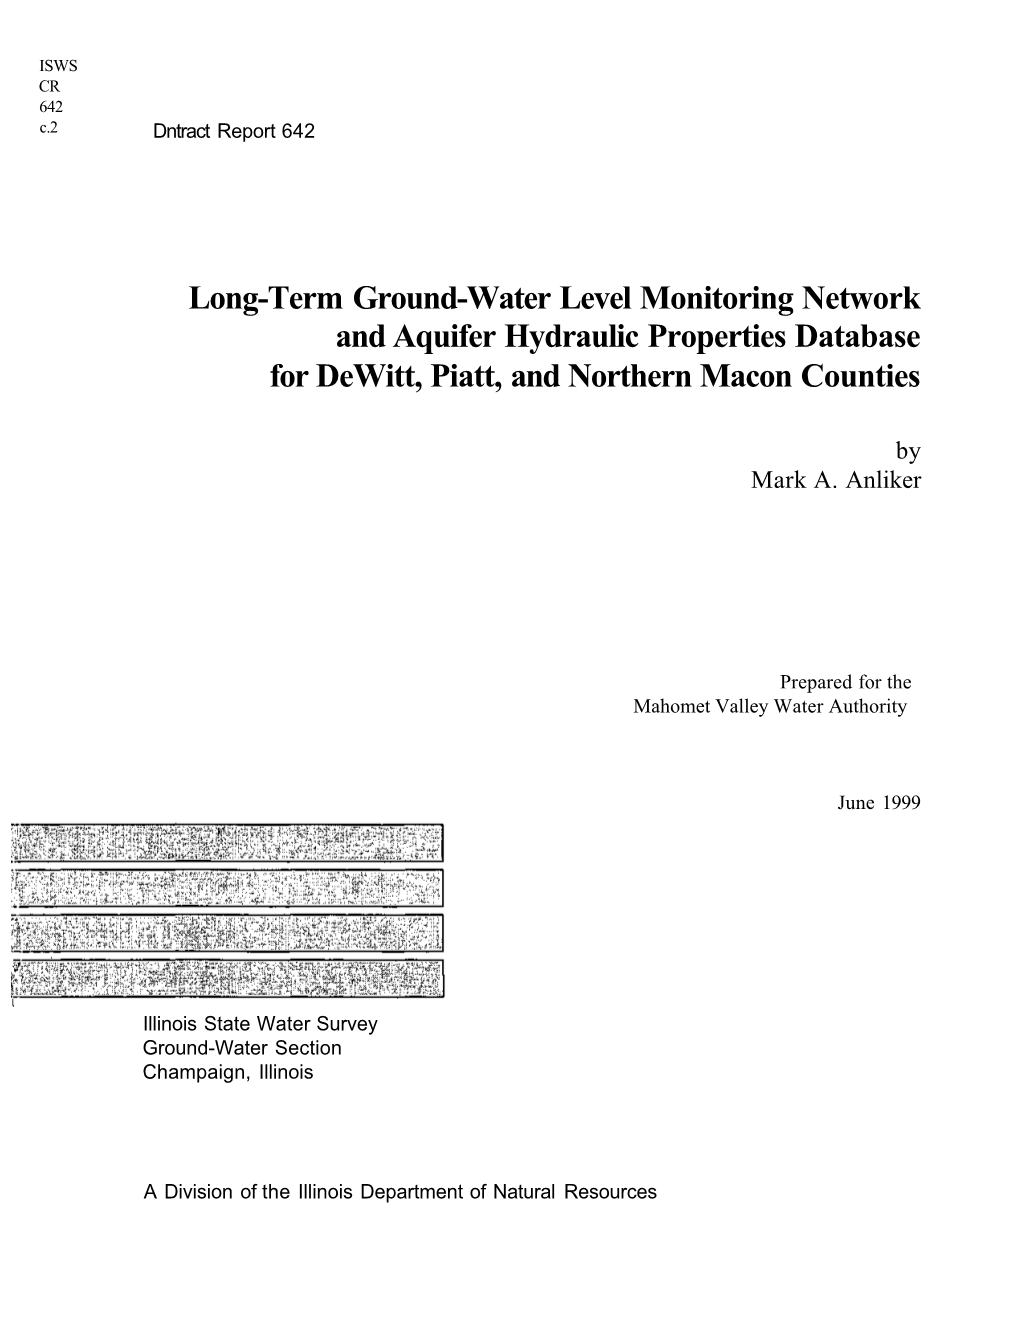 Long-Term Ground-Water Level Monitoring Network and Aquifer Hydraulic Properties Database for Dewitt, Piatt, and Northern Macon Counties